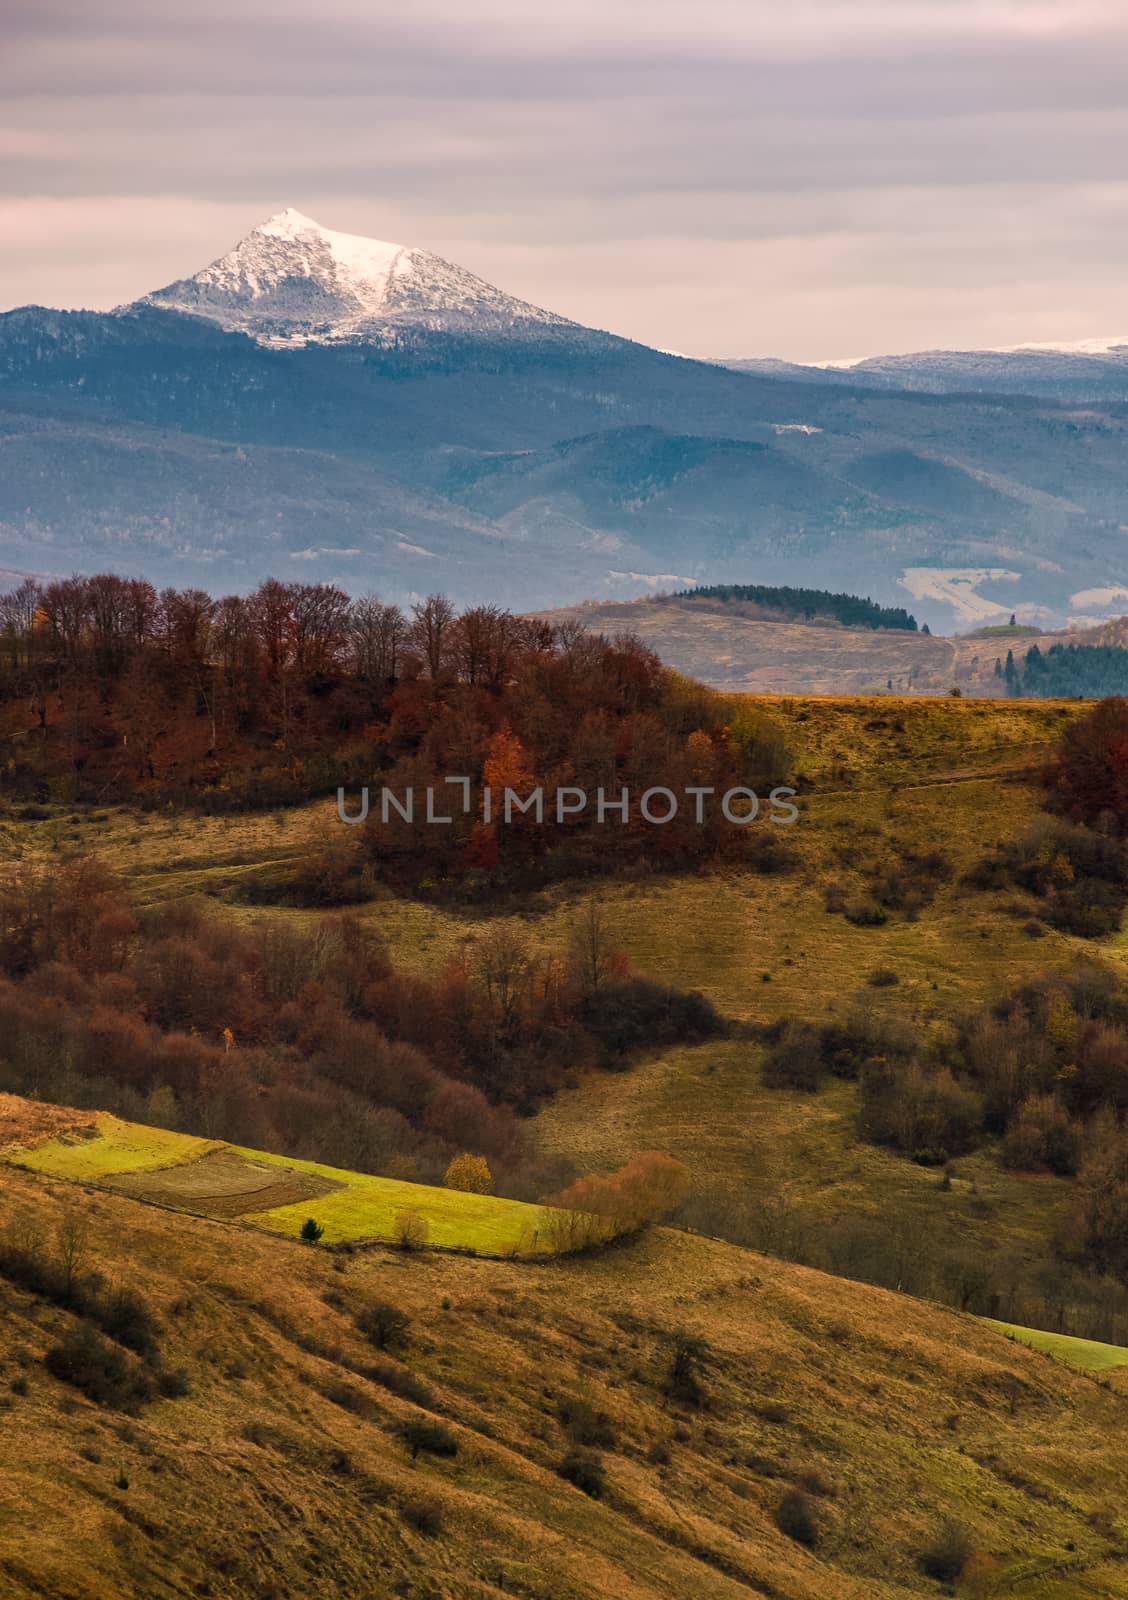 snowy peak behind the rolling hills in autumn by Pellinni